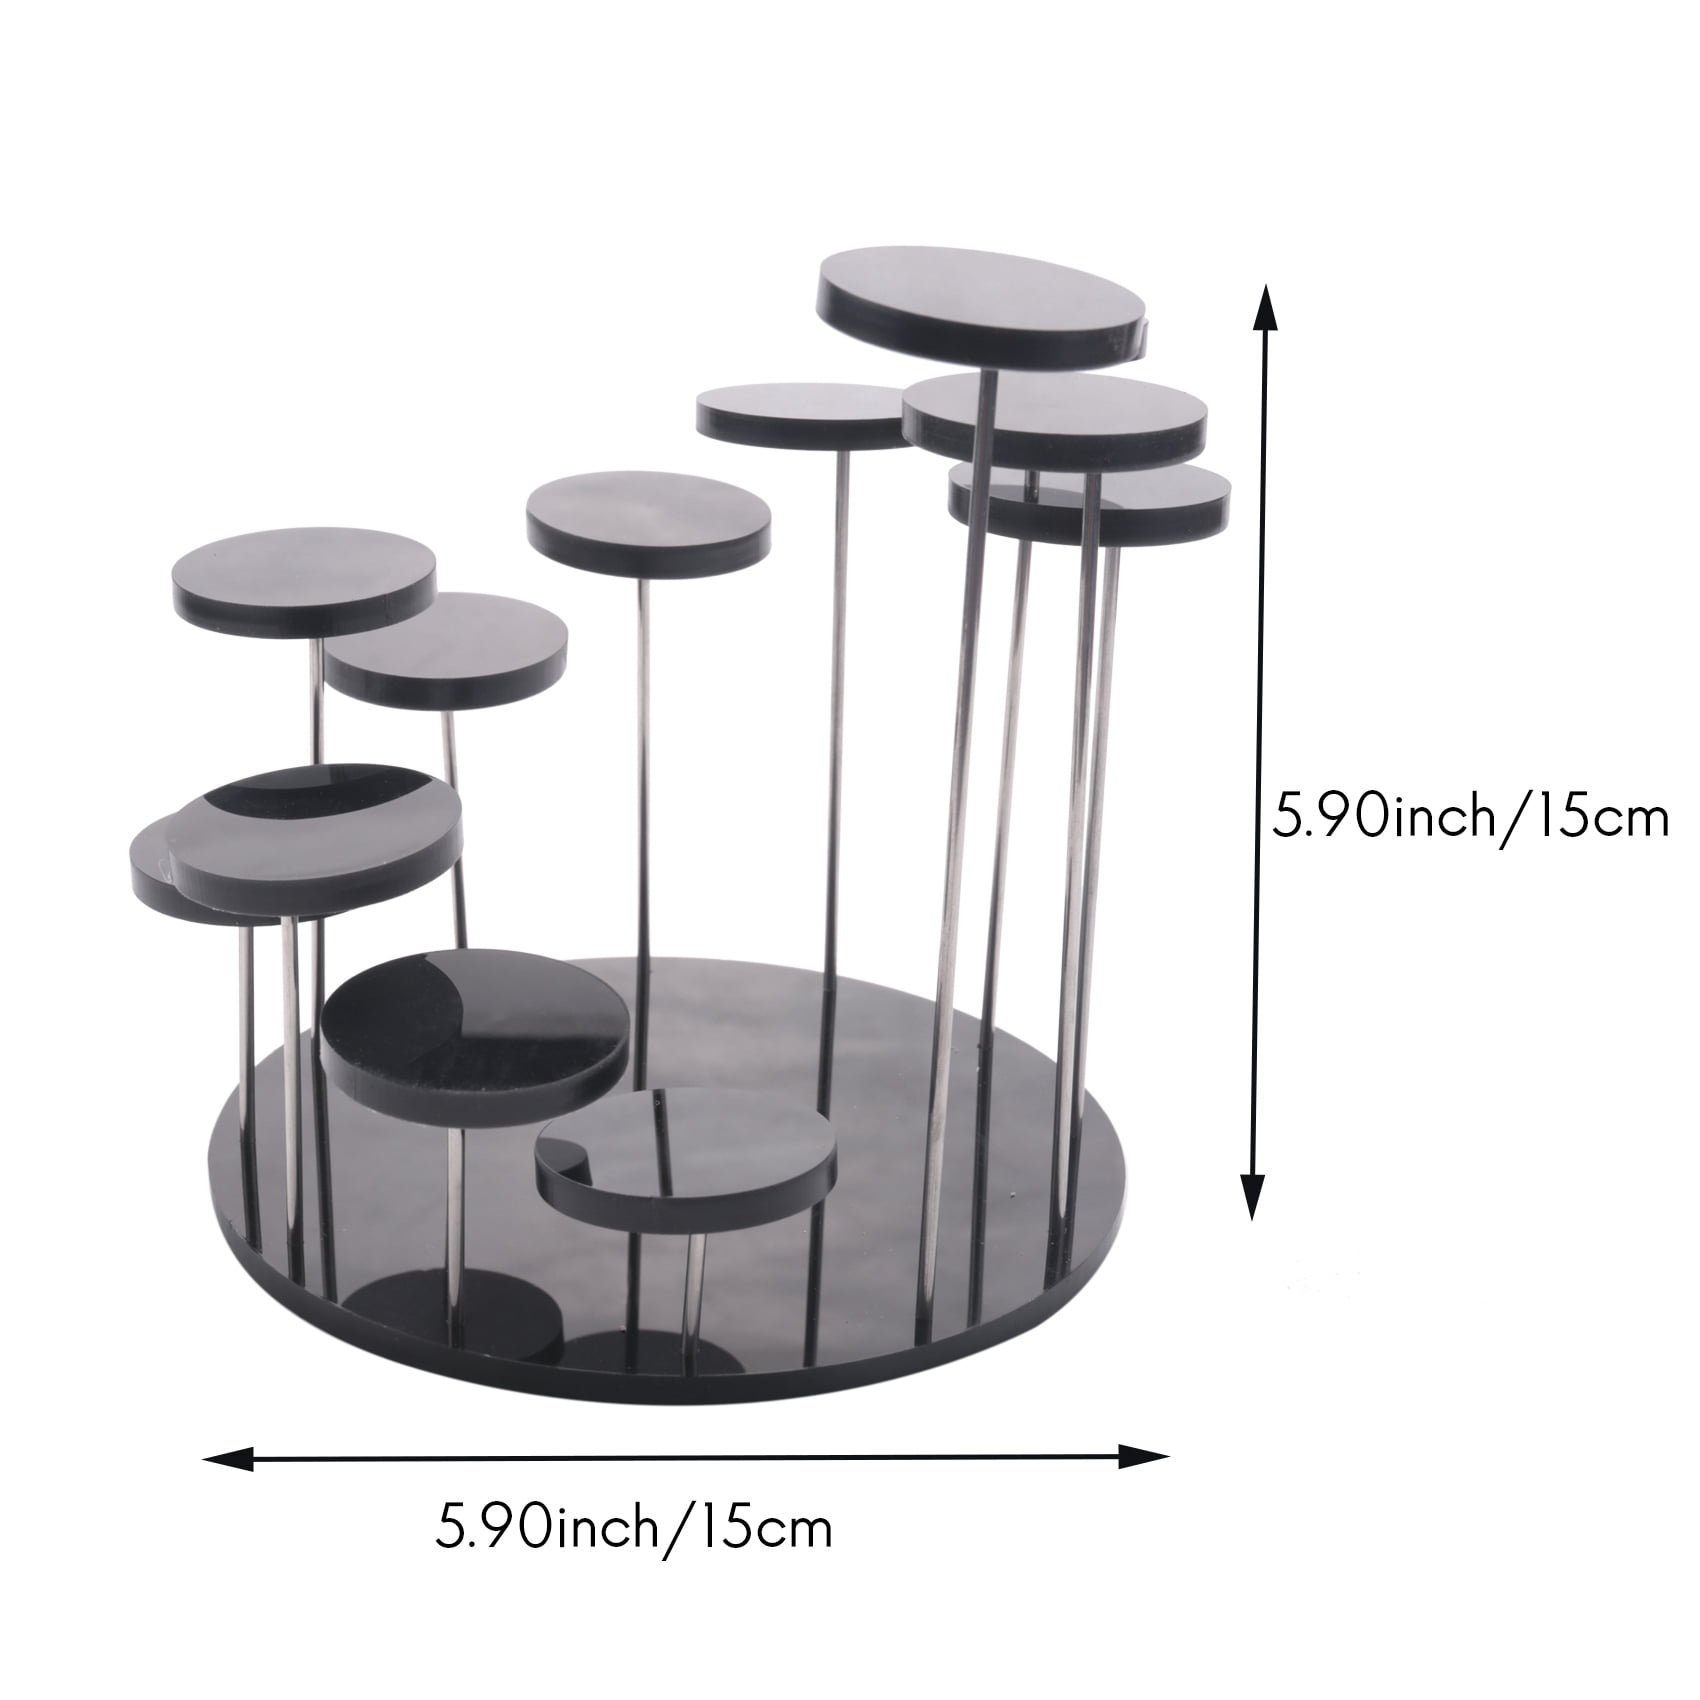 AKAT Cupcake Stand Acrylic Display Stand for Jewelry/Cake Dessert Rack Wedding Birthday Party Decoration Tools Black